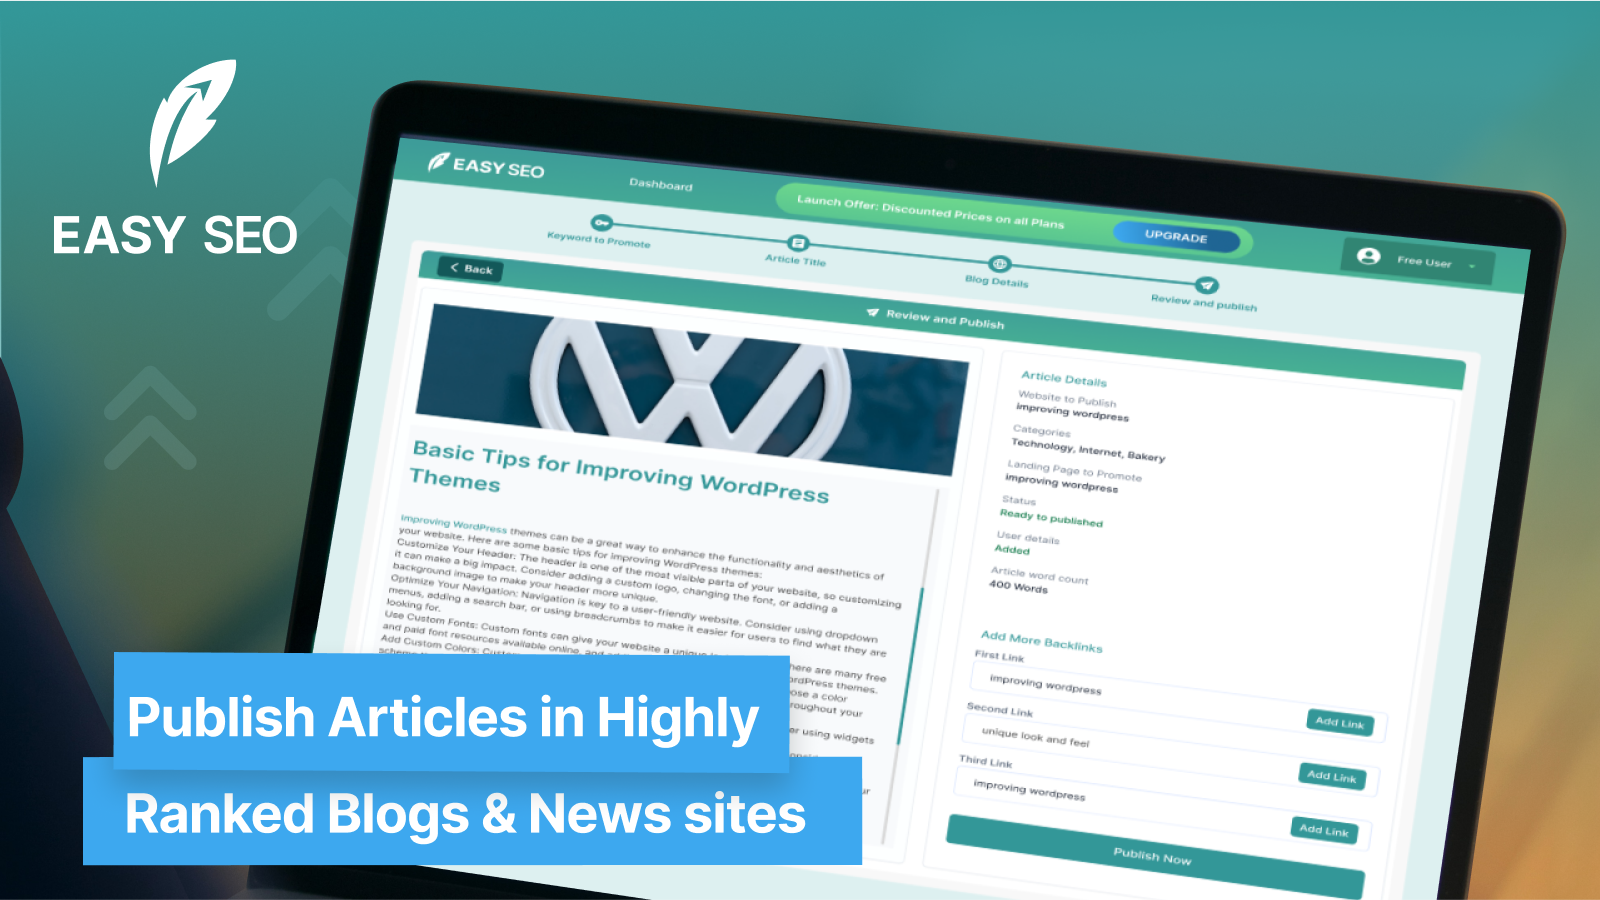 Publish Articles in Highly Ranked Blogs & News Sites